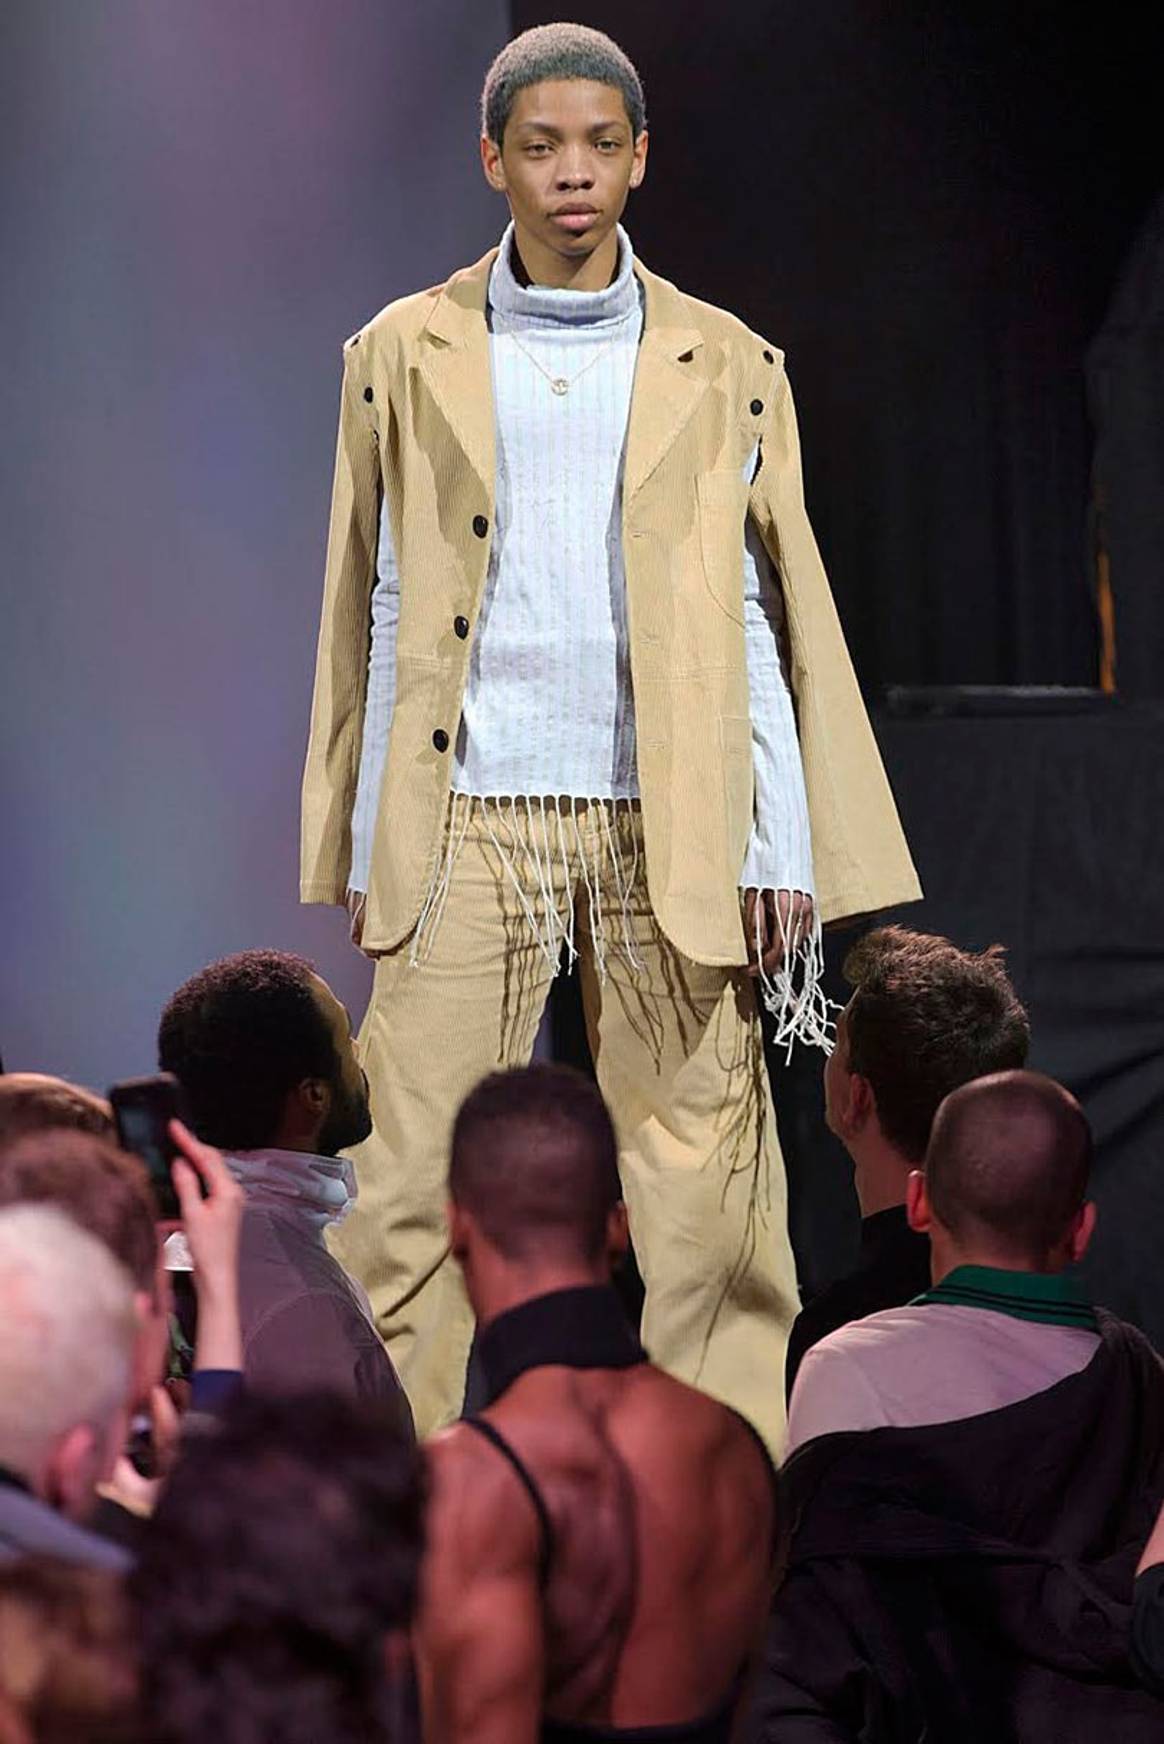 Telfar could be just what New York Fashion Week needs